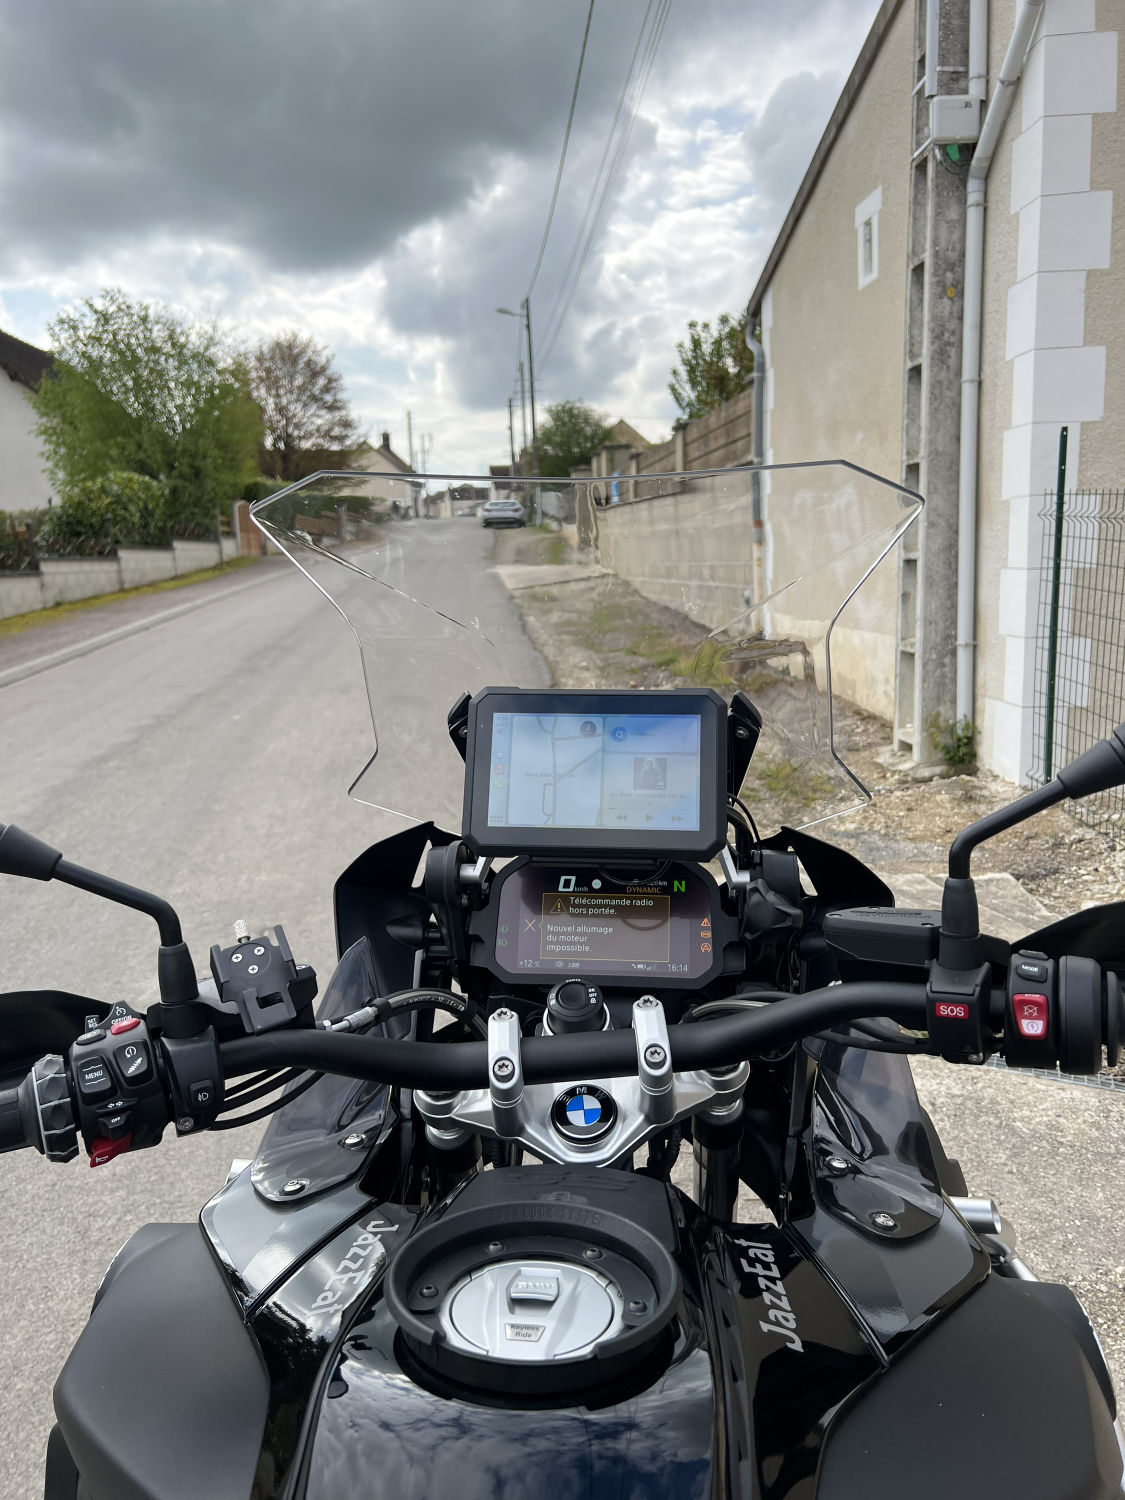 C7 7 Motorcycle CayPlay Android Auto